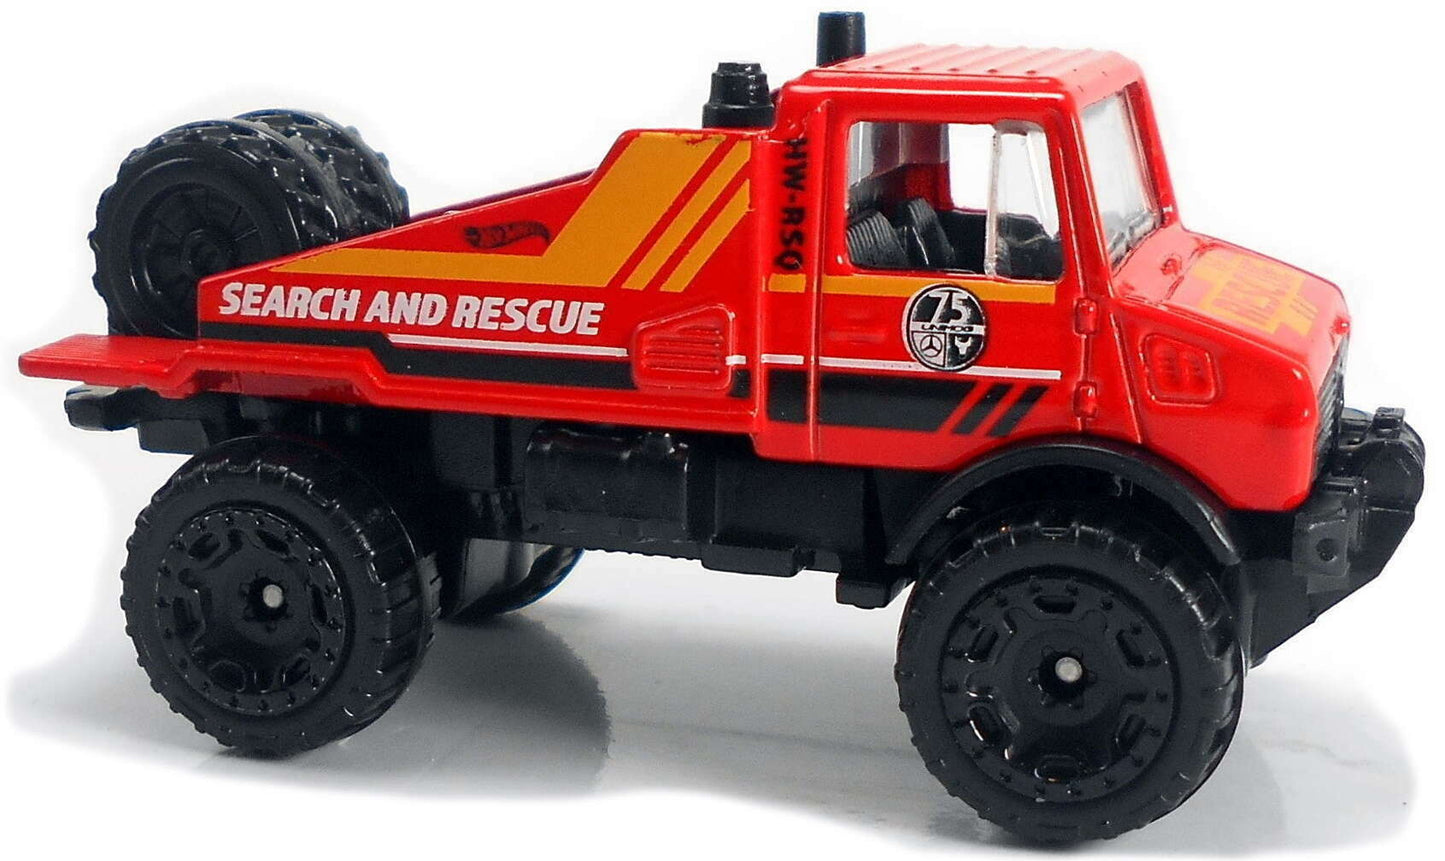 Hot Wheels 2021 - Collector # 188/250 - HW Rescue 1/10 - Mercedes-Benz Unimog 1300 - Red / 'Search and Rescue' - USA